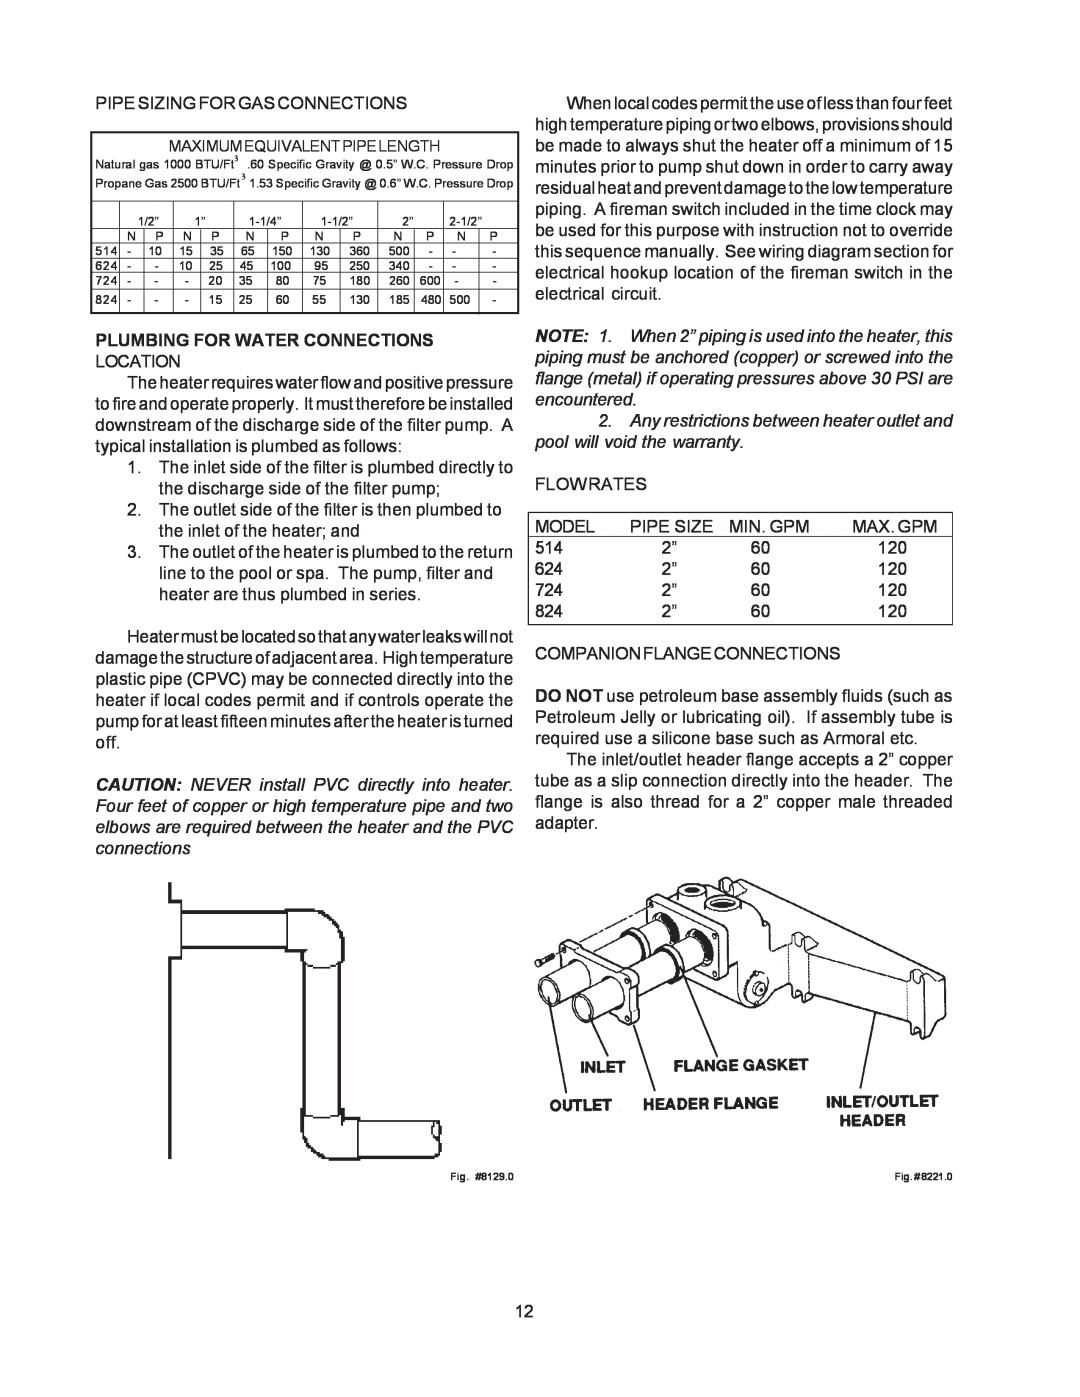 Raypak 514-824 manual Plumbing For Water Connections Location 